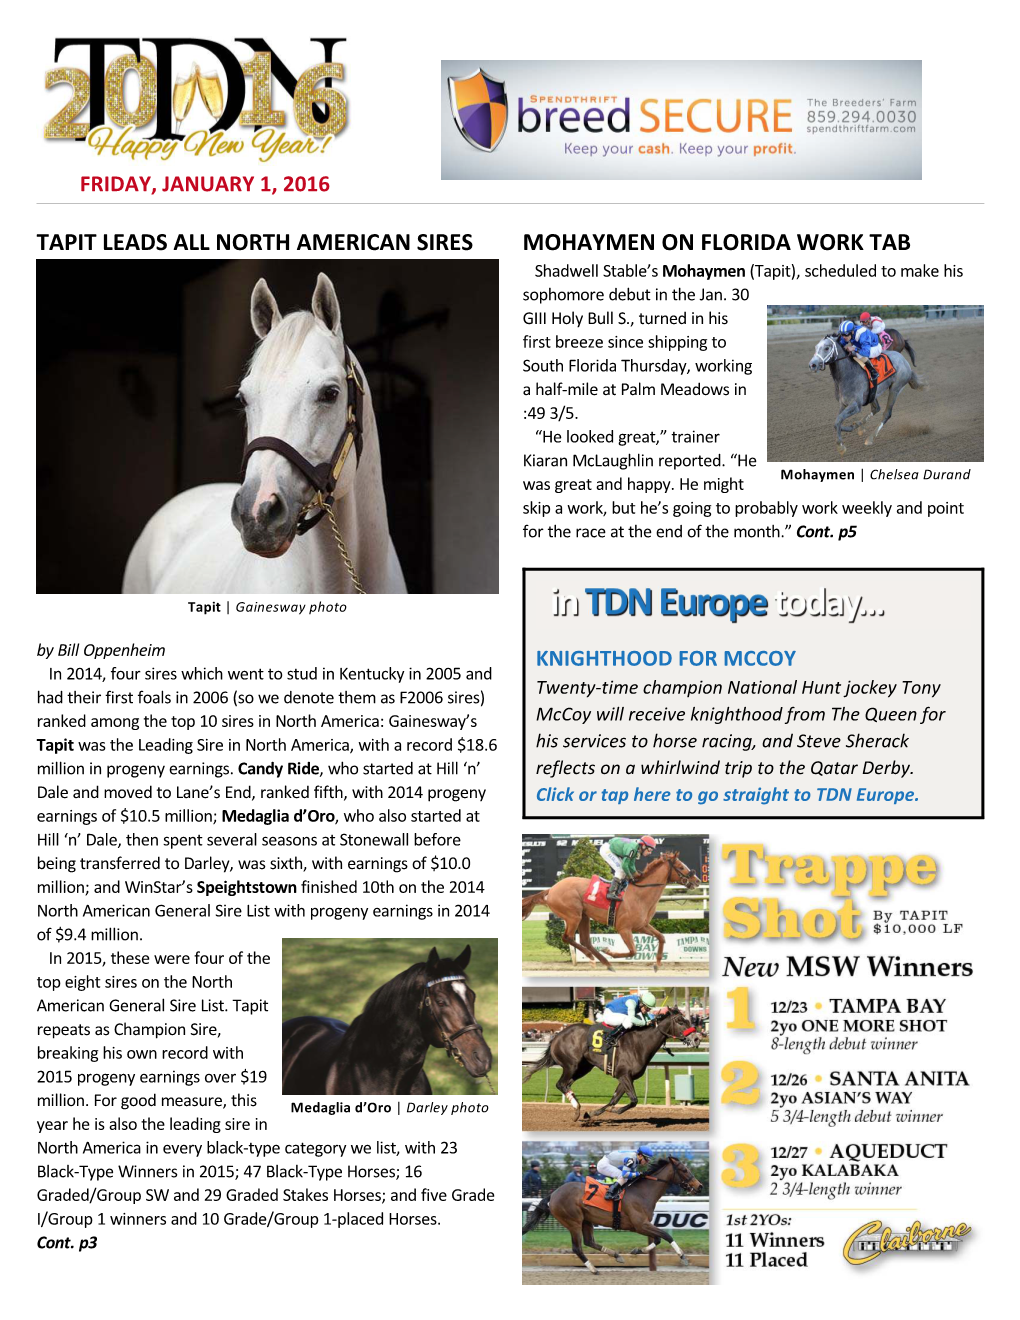 TAPIT LEADS ALL NORTH AMERICAN SIRES MOHAYMEN on FLORIDA WORK TAB Shadwell Stable’S Mohaymen (Tapit), Scheduled to Make His Sophomore Debut in the Jan